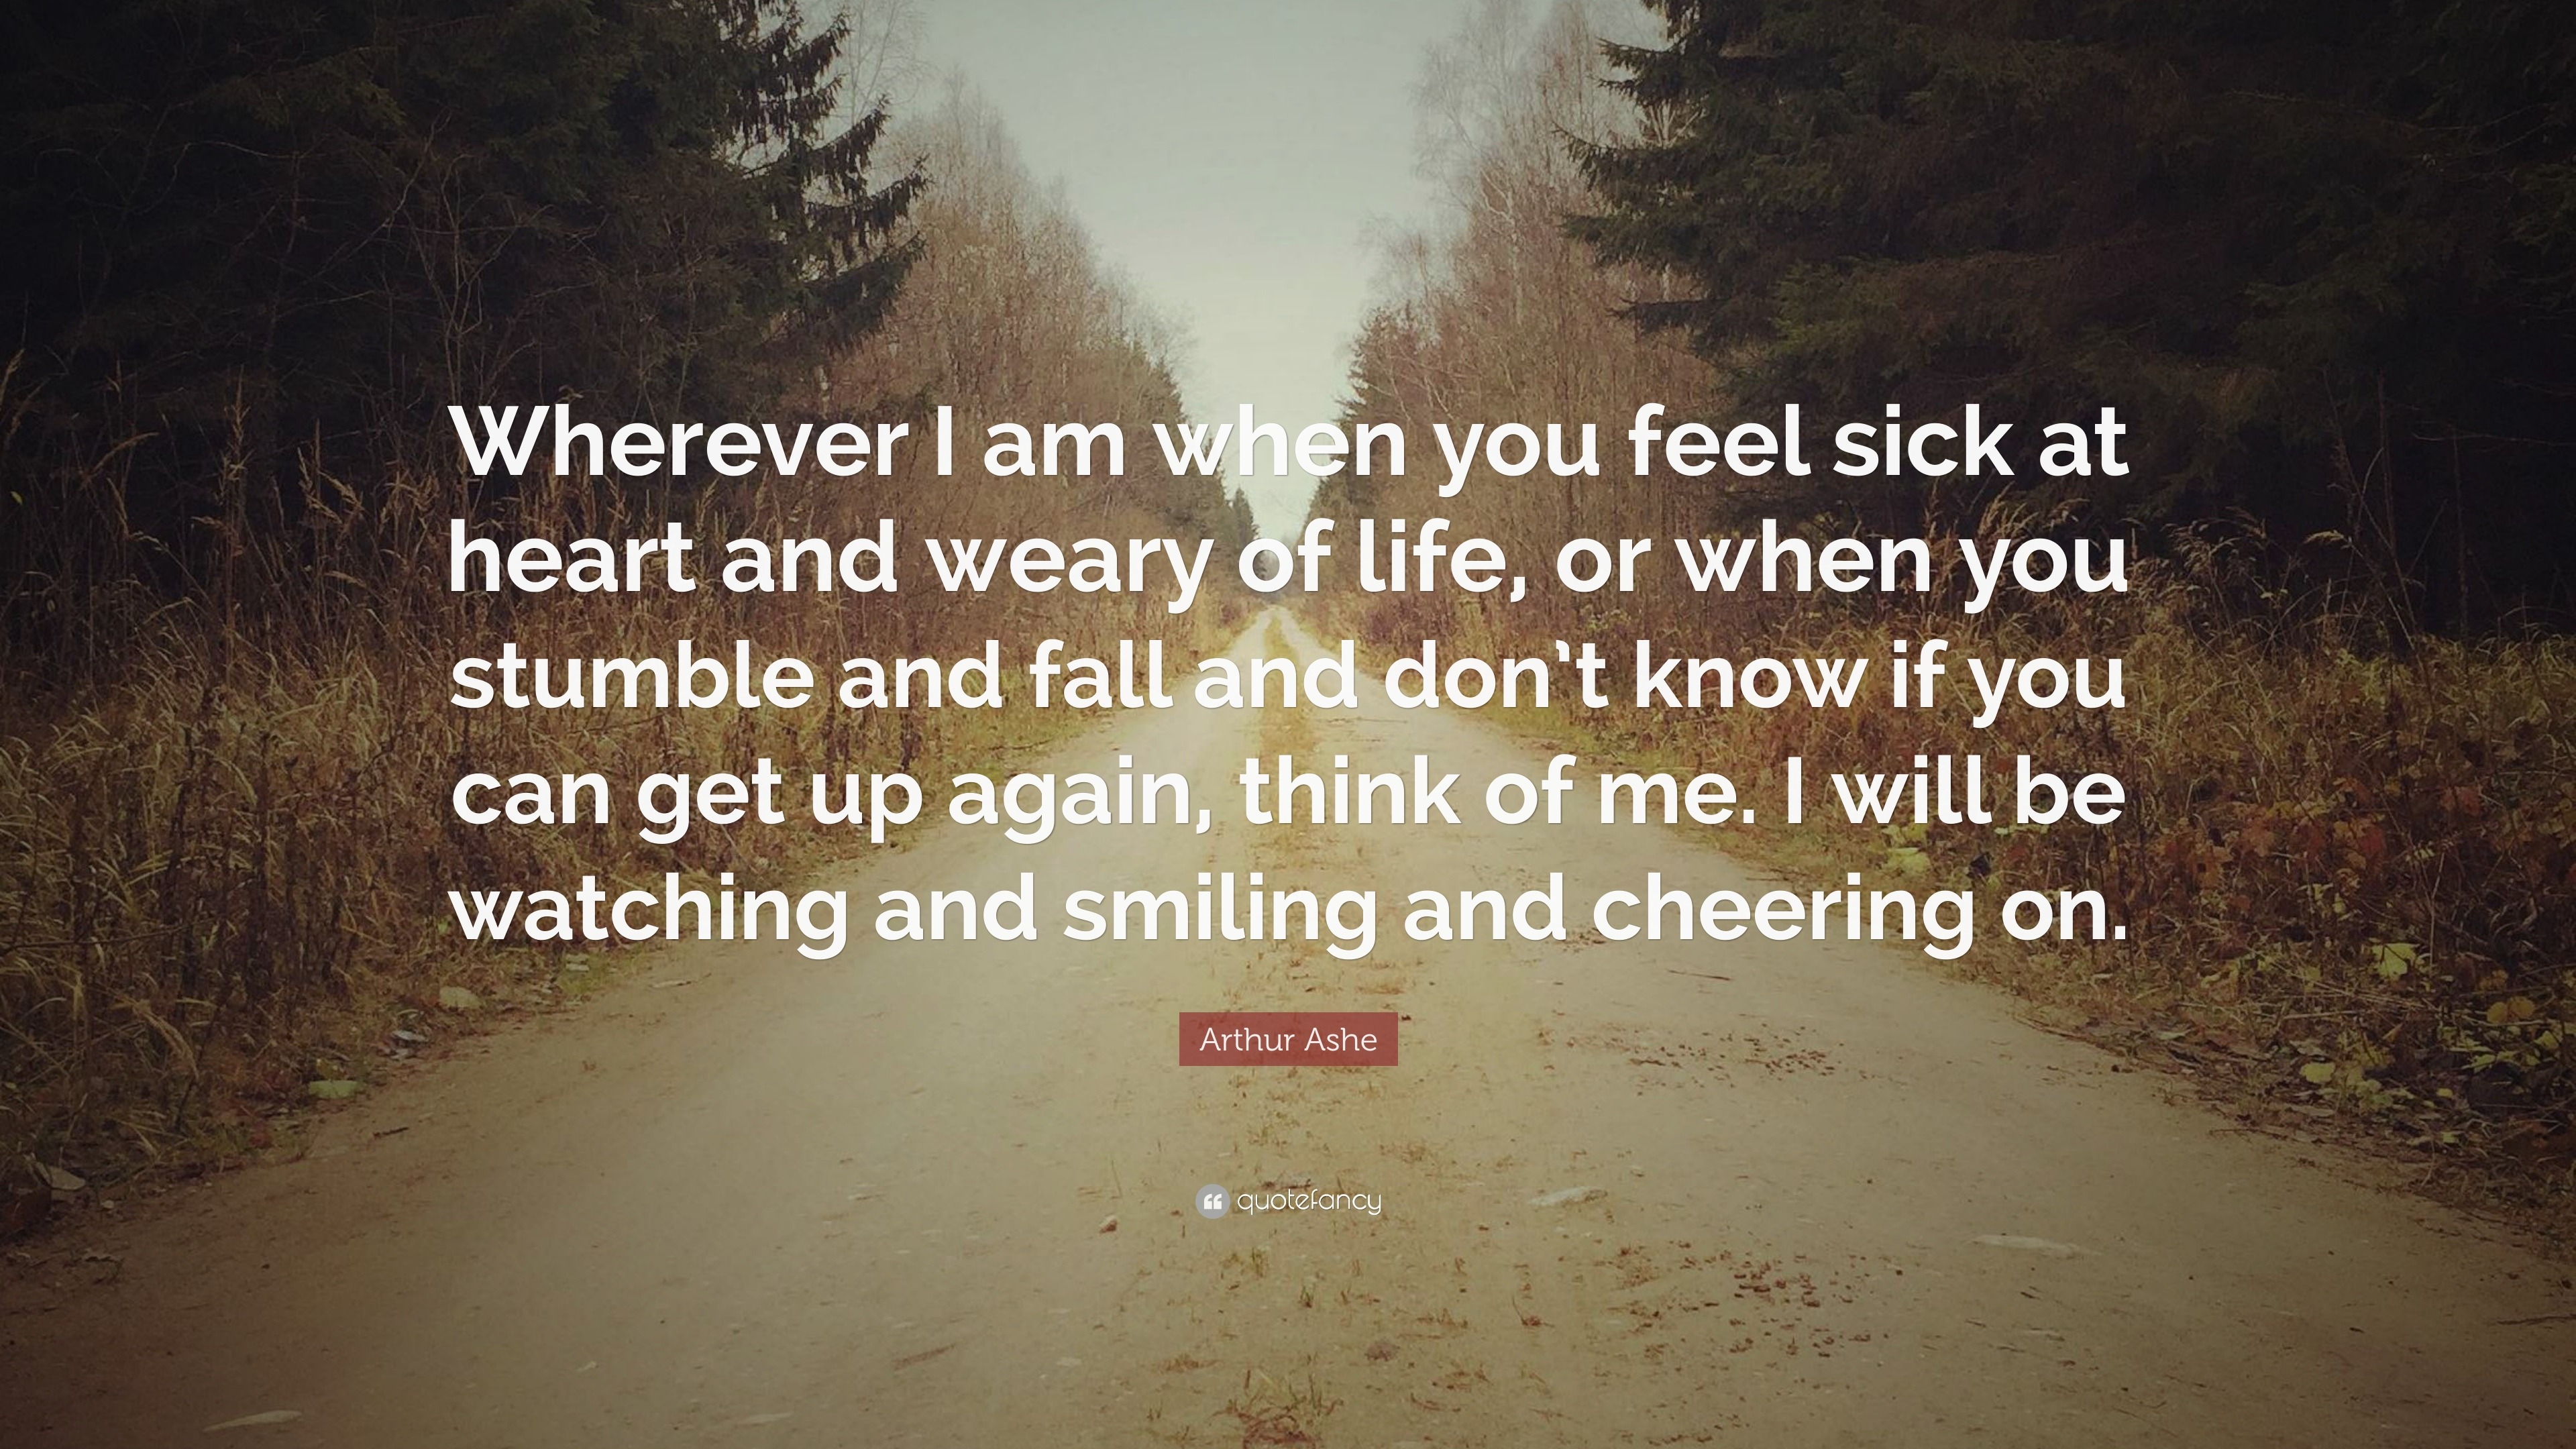 Arthur Ashe Quote: “Wherever I am when you feel sick at heart and weary ...